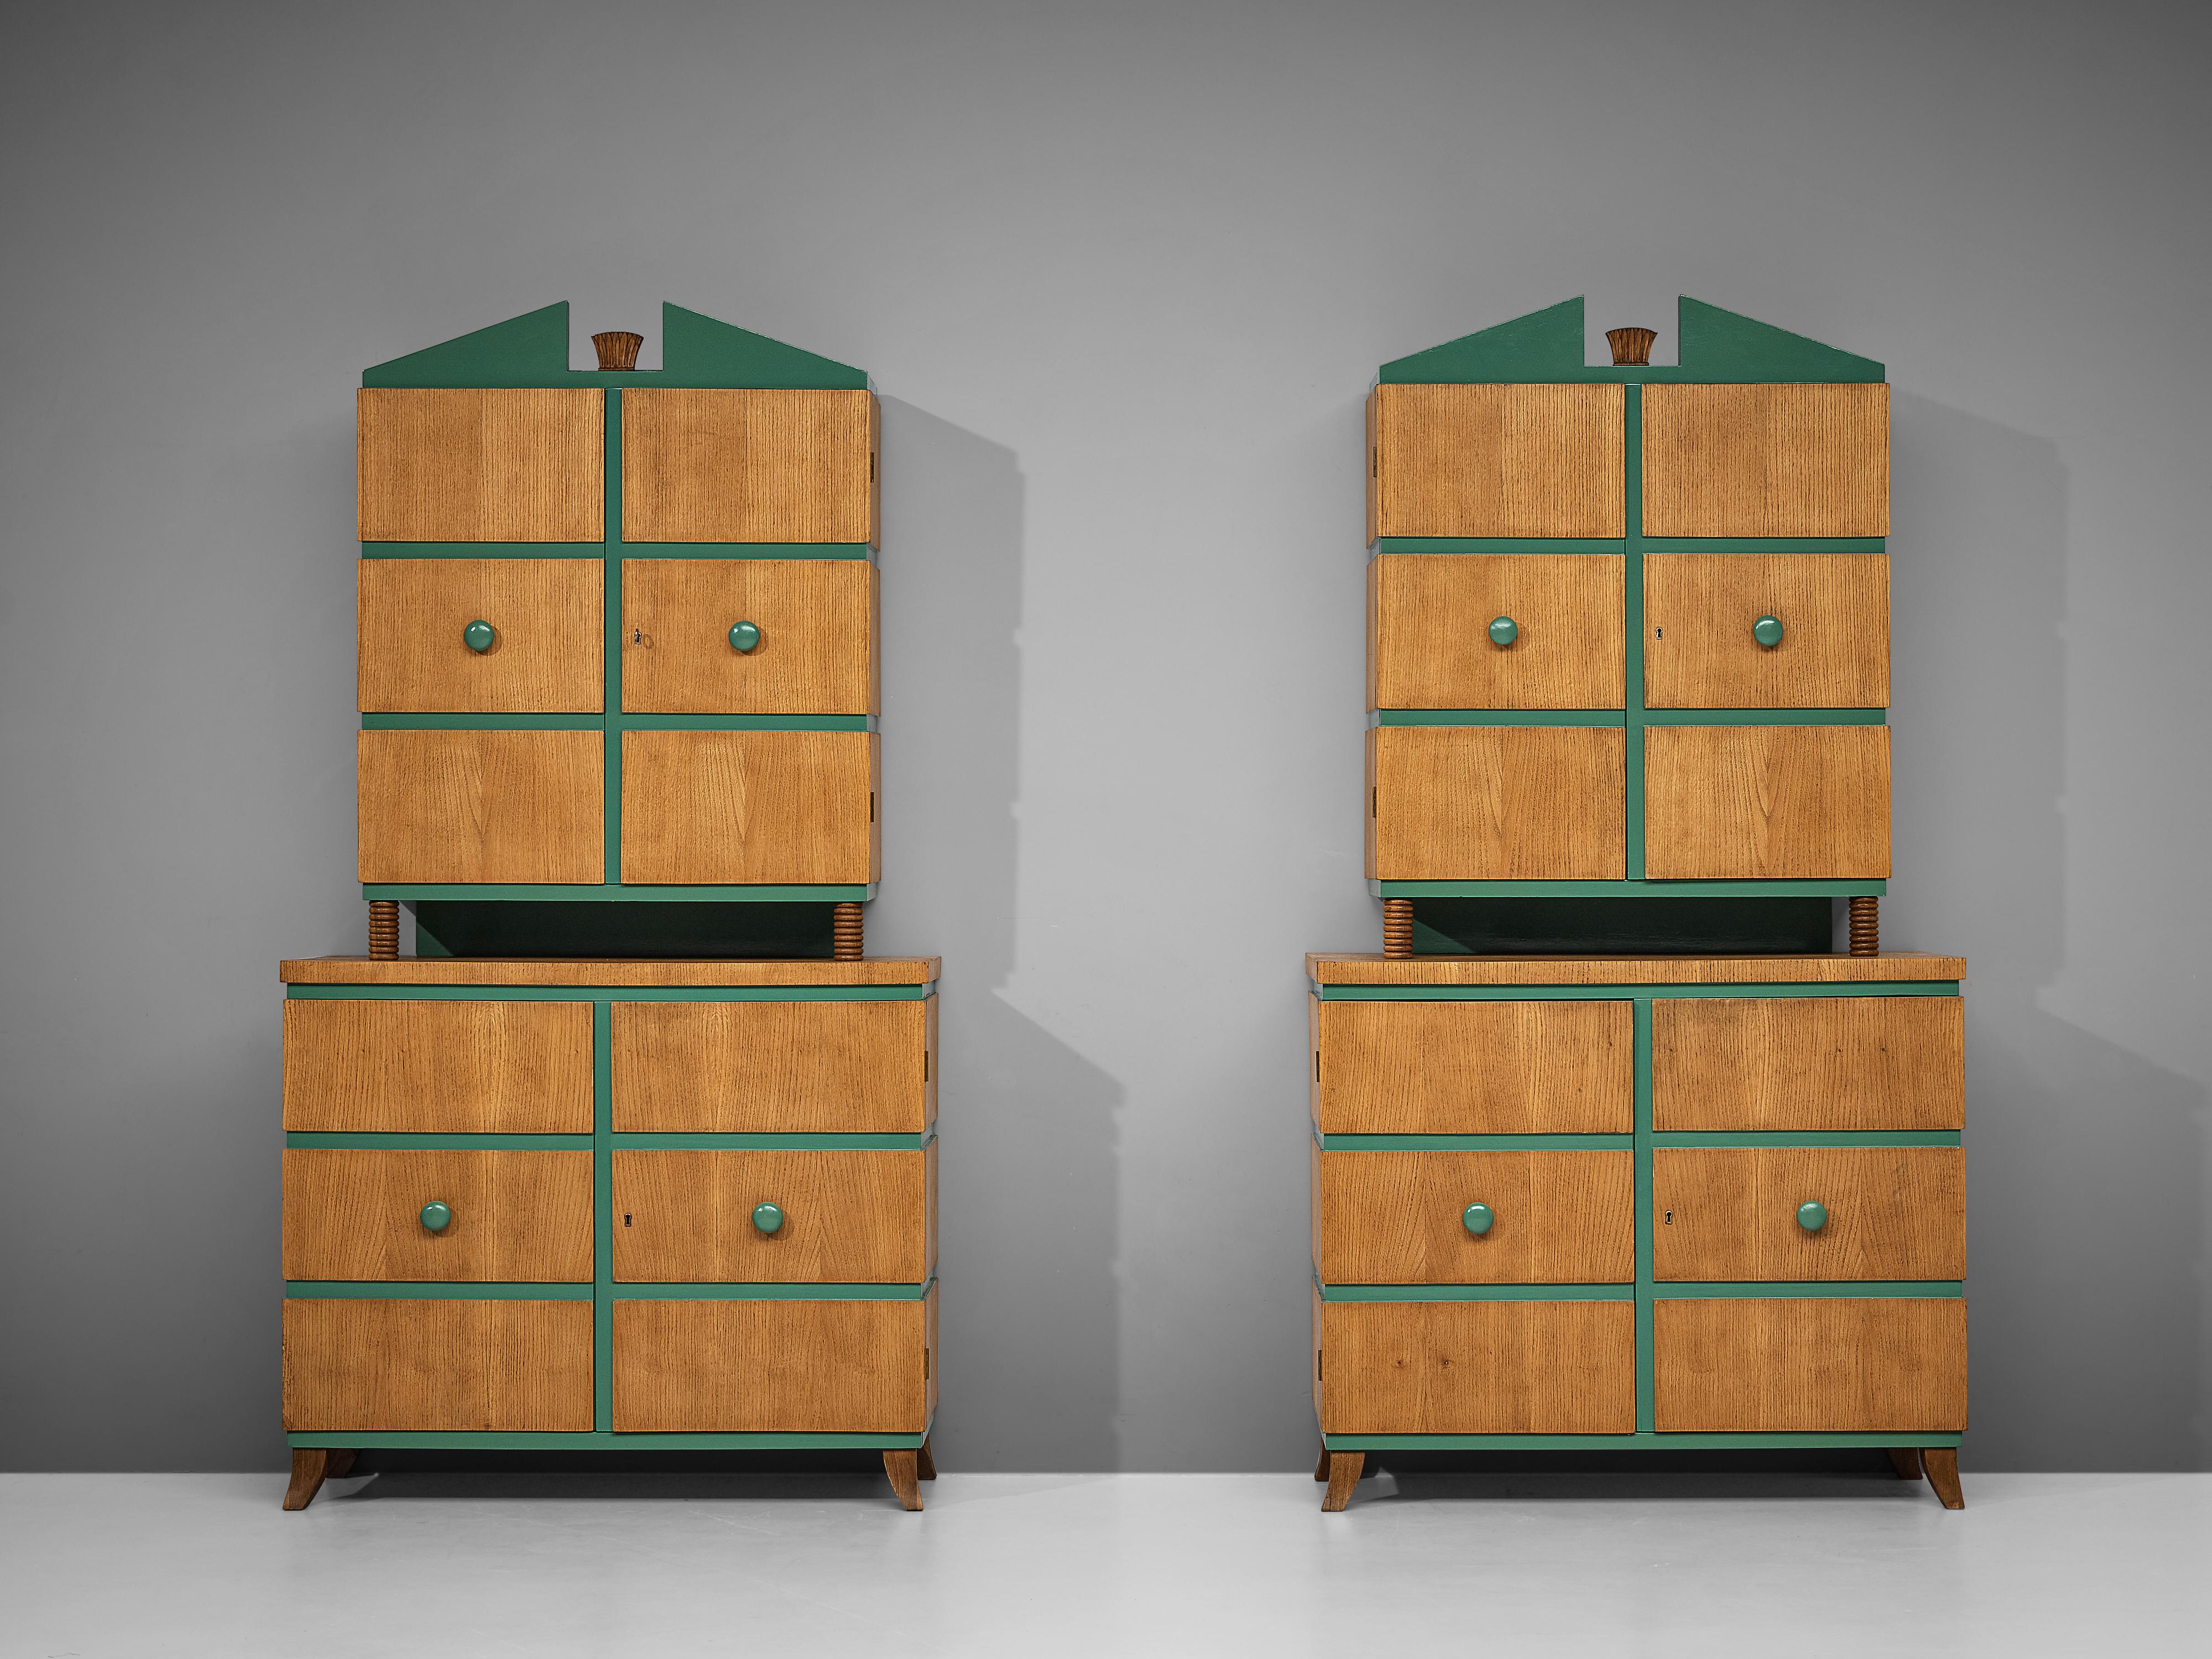 Pair of cabinets, oak, Italy, 1970s

These Art Deco inspired highboards have a very rare and unique look. The cabinets consist out of two layers that each form a different part. The upper piece has two doors with shelves and stunning decorative